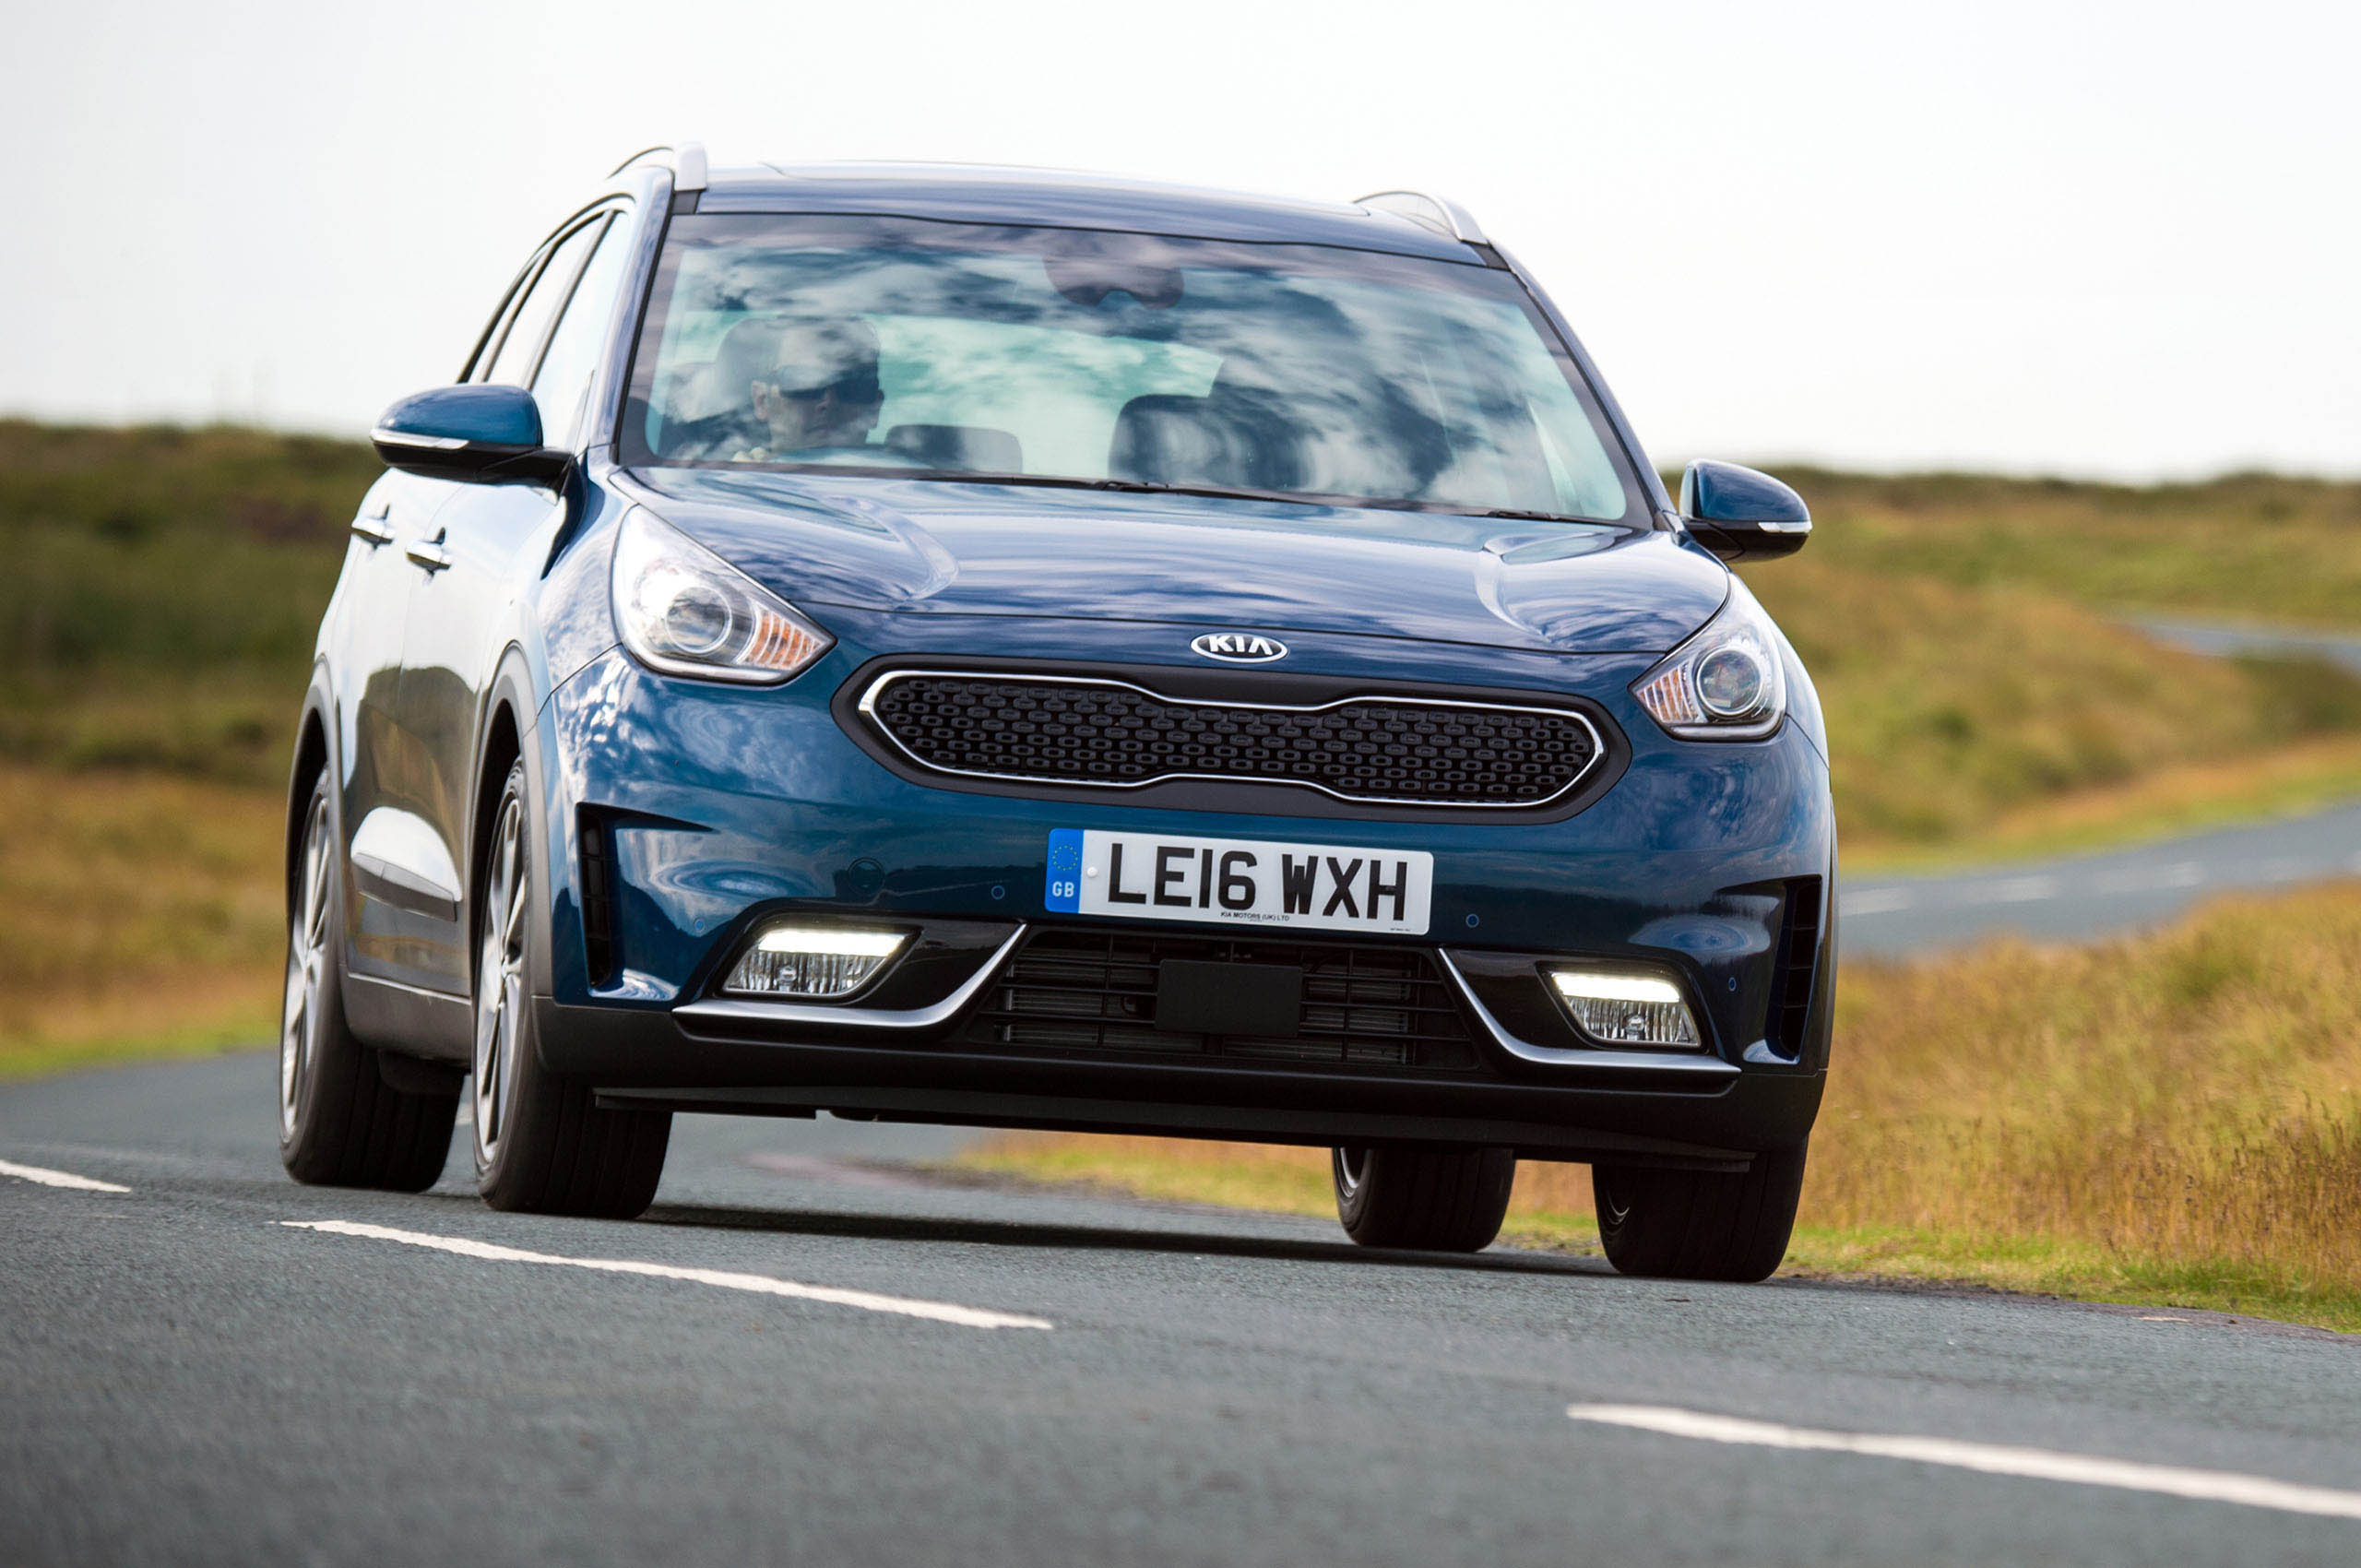 https://www.autocar.co.uk/sites/autocar.co.uk/files/images/car-reviews/first-drives/legacy/kia-niro-first-edition-2016-724.jpg